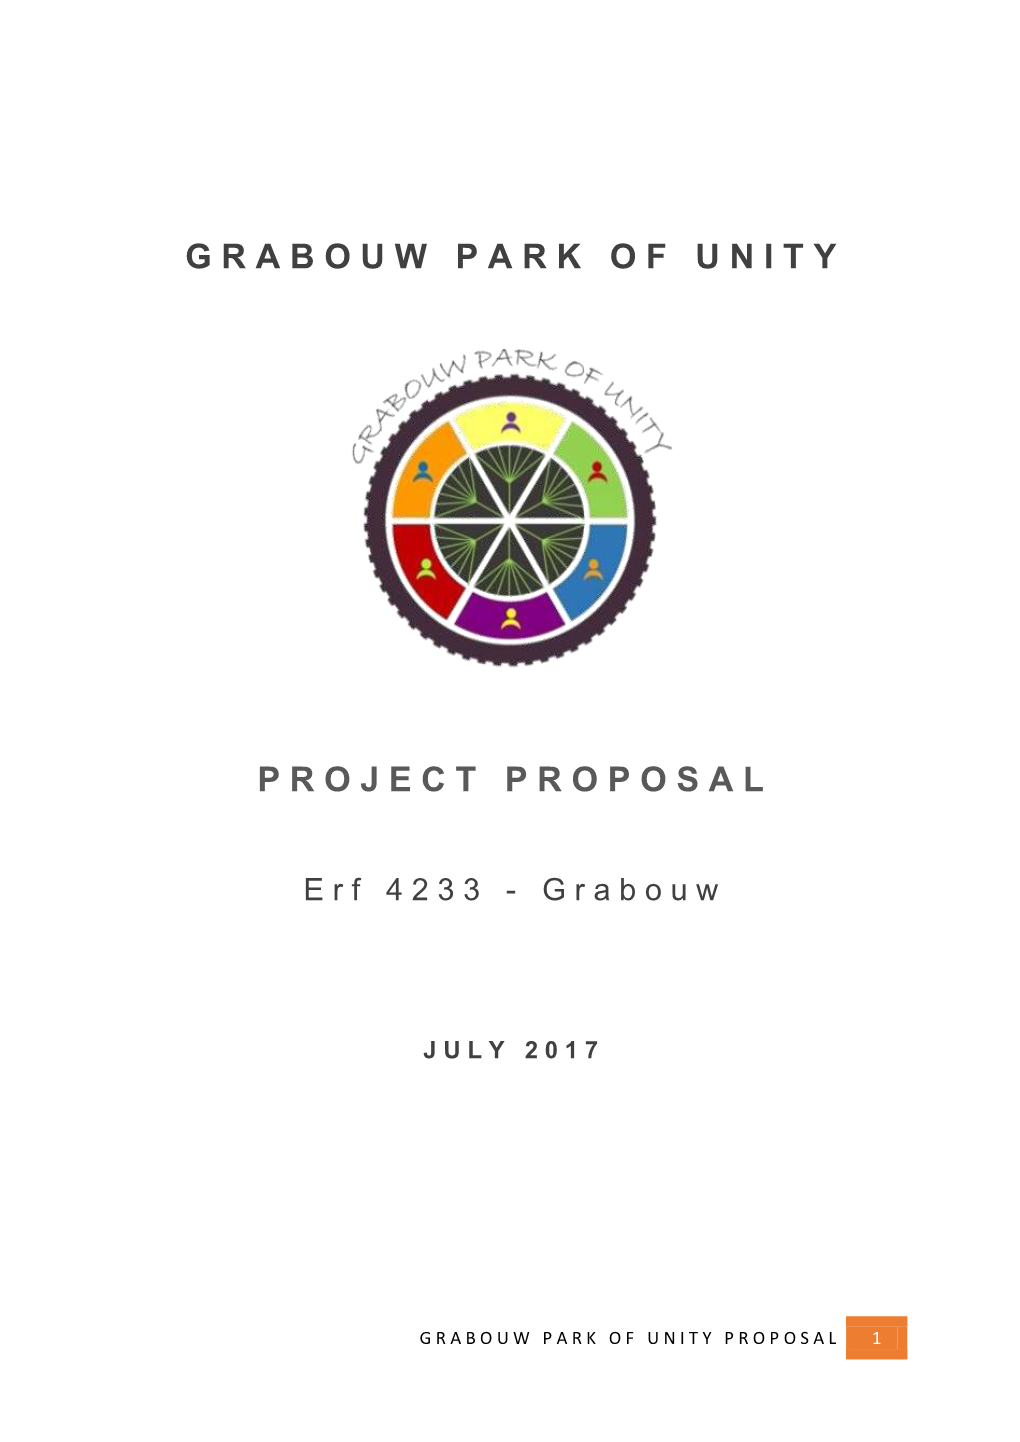 Grabouw Park of Unity (GPOU) Willing Receiver) No of Jobs Created: GPOU TOTAL: Directly: 300-400 Indirectly: Buffer Zone – 1000S Tourism – 1000‟S to 10 000‟S W O R K